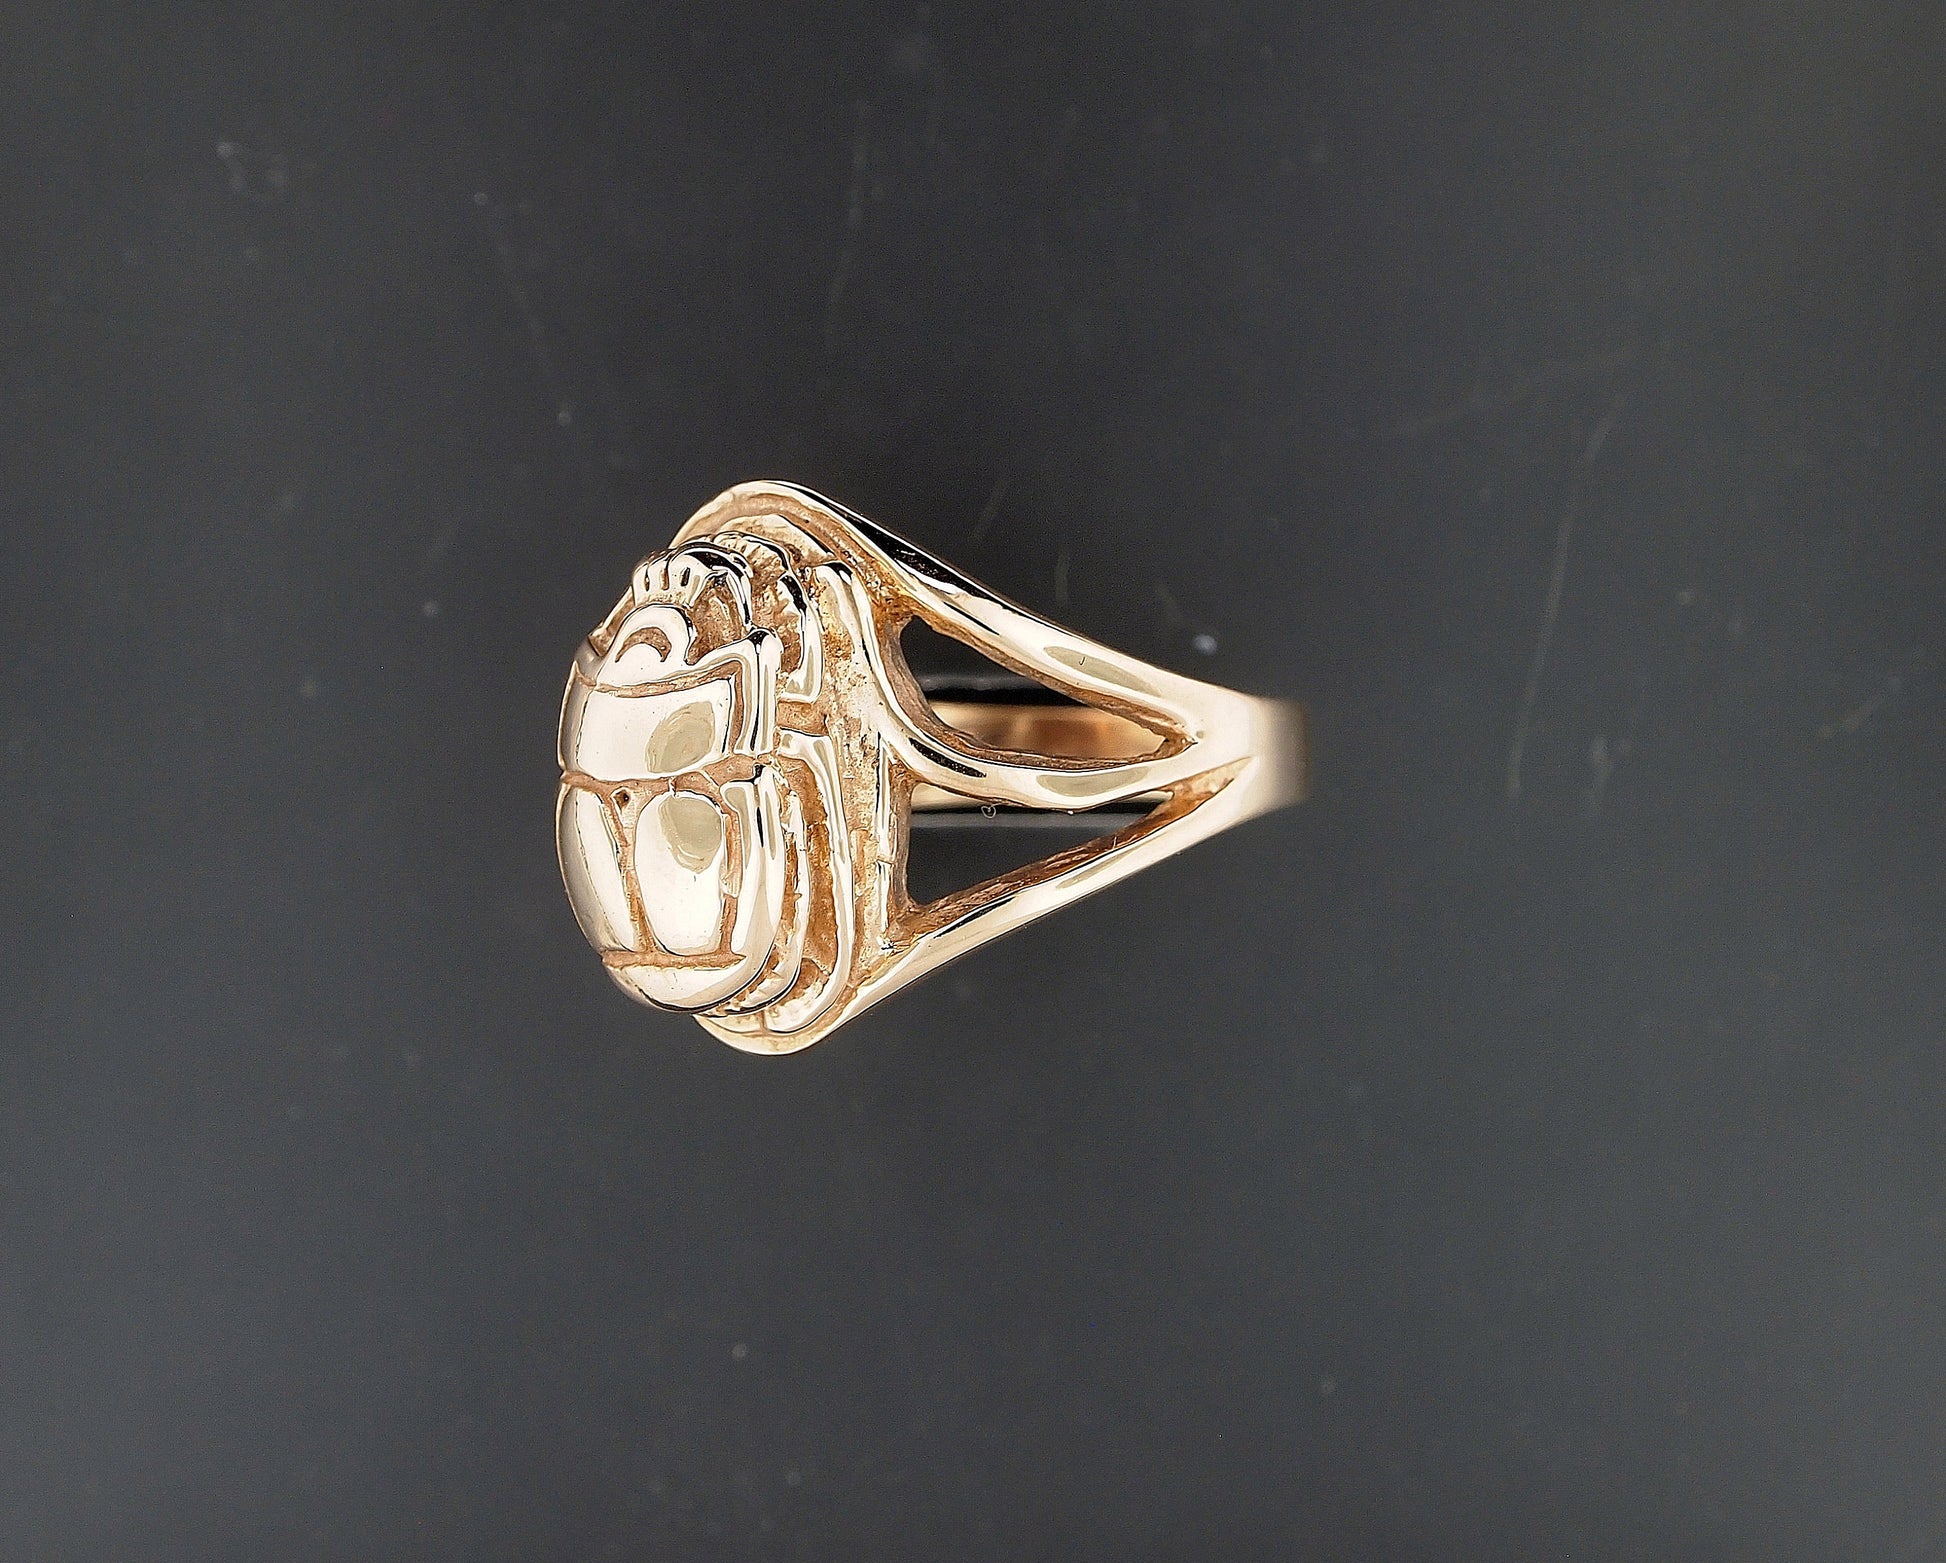 Egyptian Scarab Ring in Sterling Silver or Antique Bronze, Mid Century Egyptian Scarab Ring, Scarab Beetle Ring, Ancient Egyptian Style Ring, Bronze Scarab Ring, Bronze Egyptian Scarab Ring, Bronze Beetle Ring, Ancient Egyptian Ring, Bronze Bug Ring